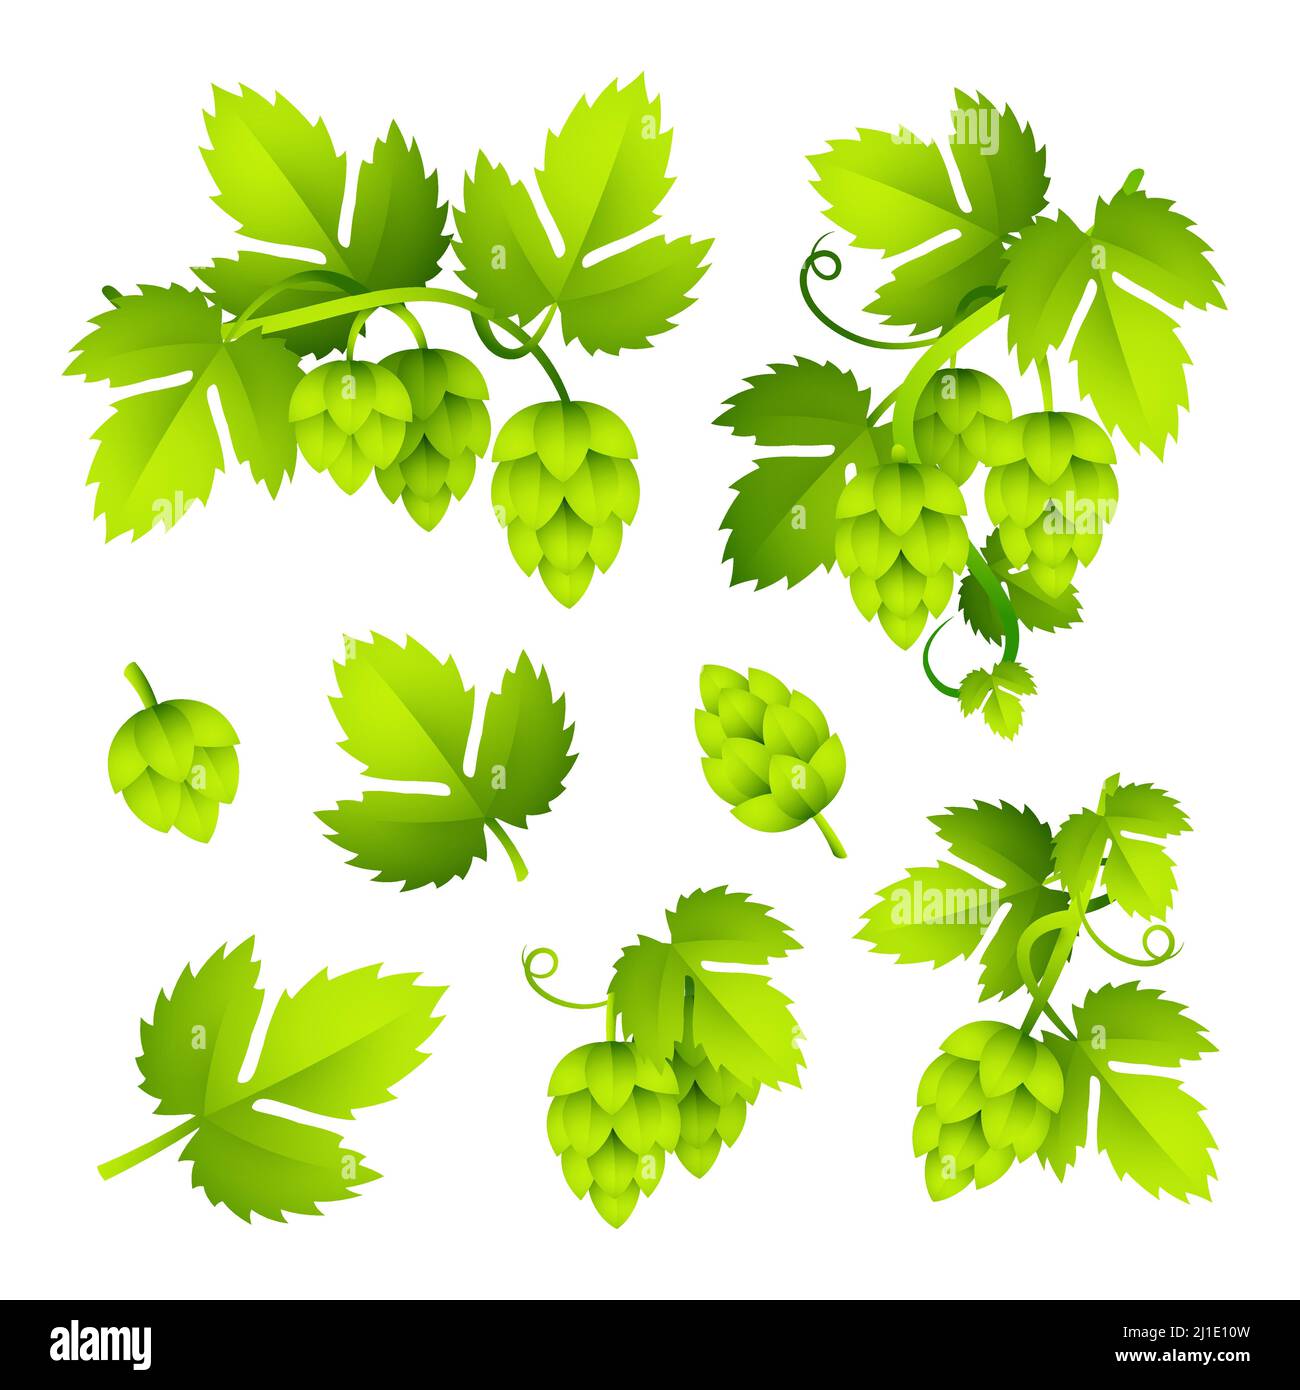 Hop colorful illustration set. Fresh green hop plant with leaves. Beer concept Realistic vector illustration can be used for topics like brewing or ha Stock Vector